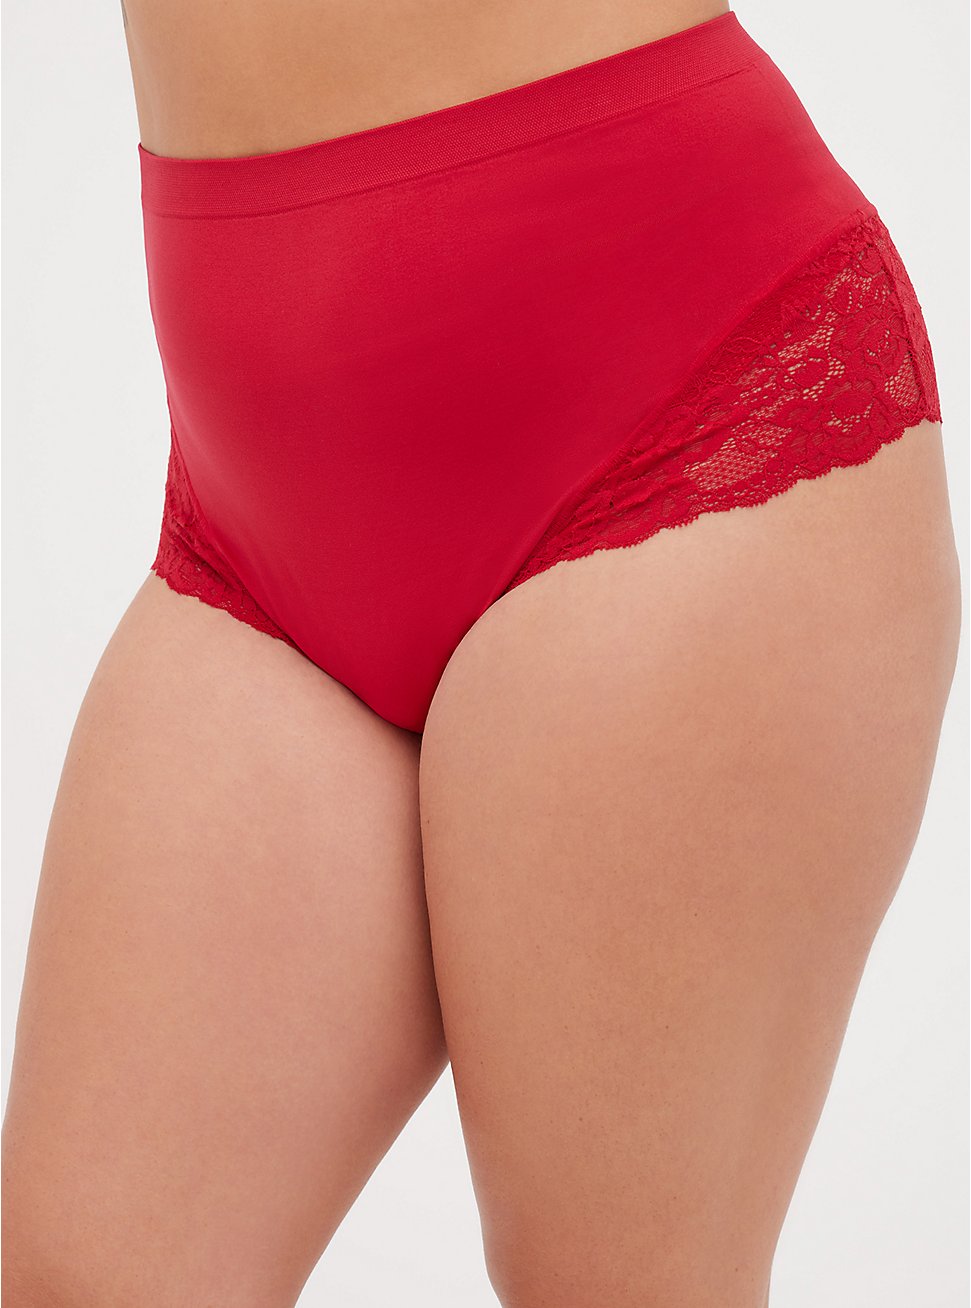 Plus Size Seamless Flirt High Waist Cheeky Panty - Red, JESTER RED, hi-res